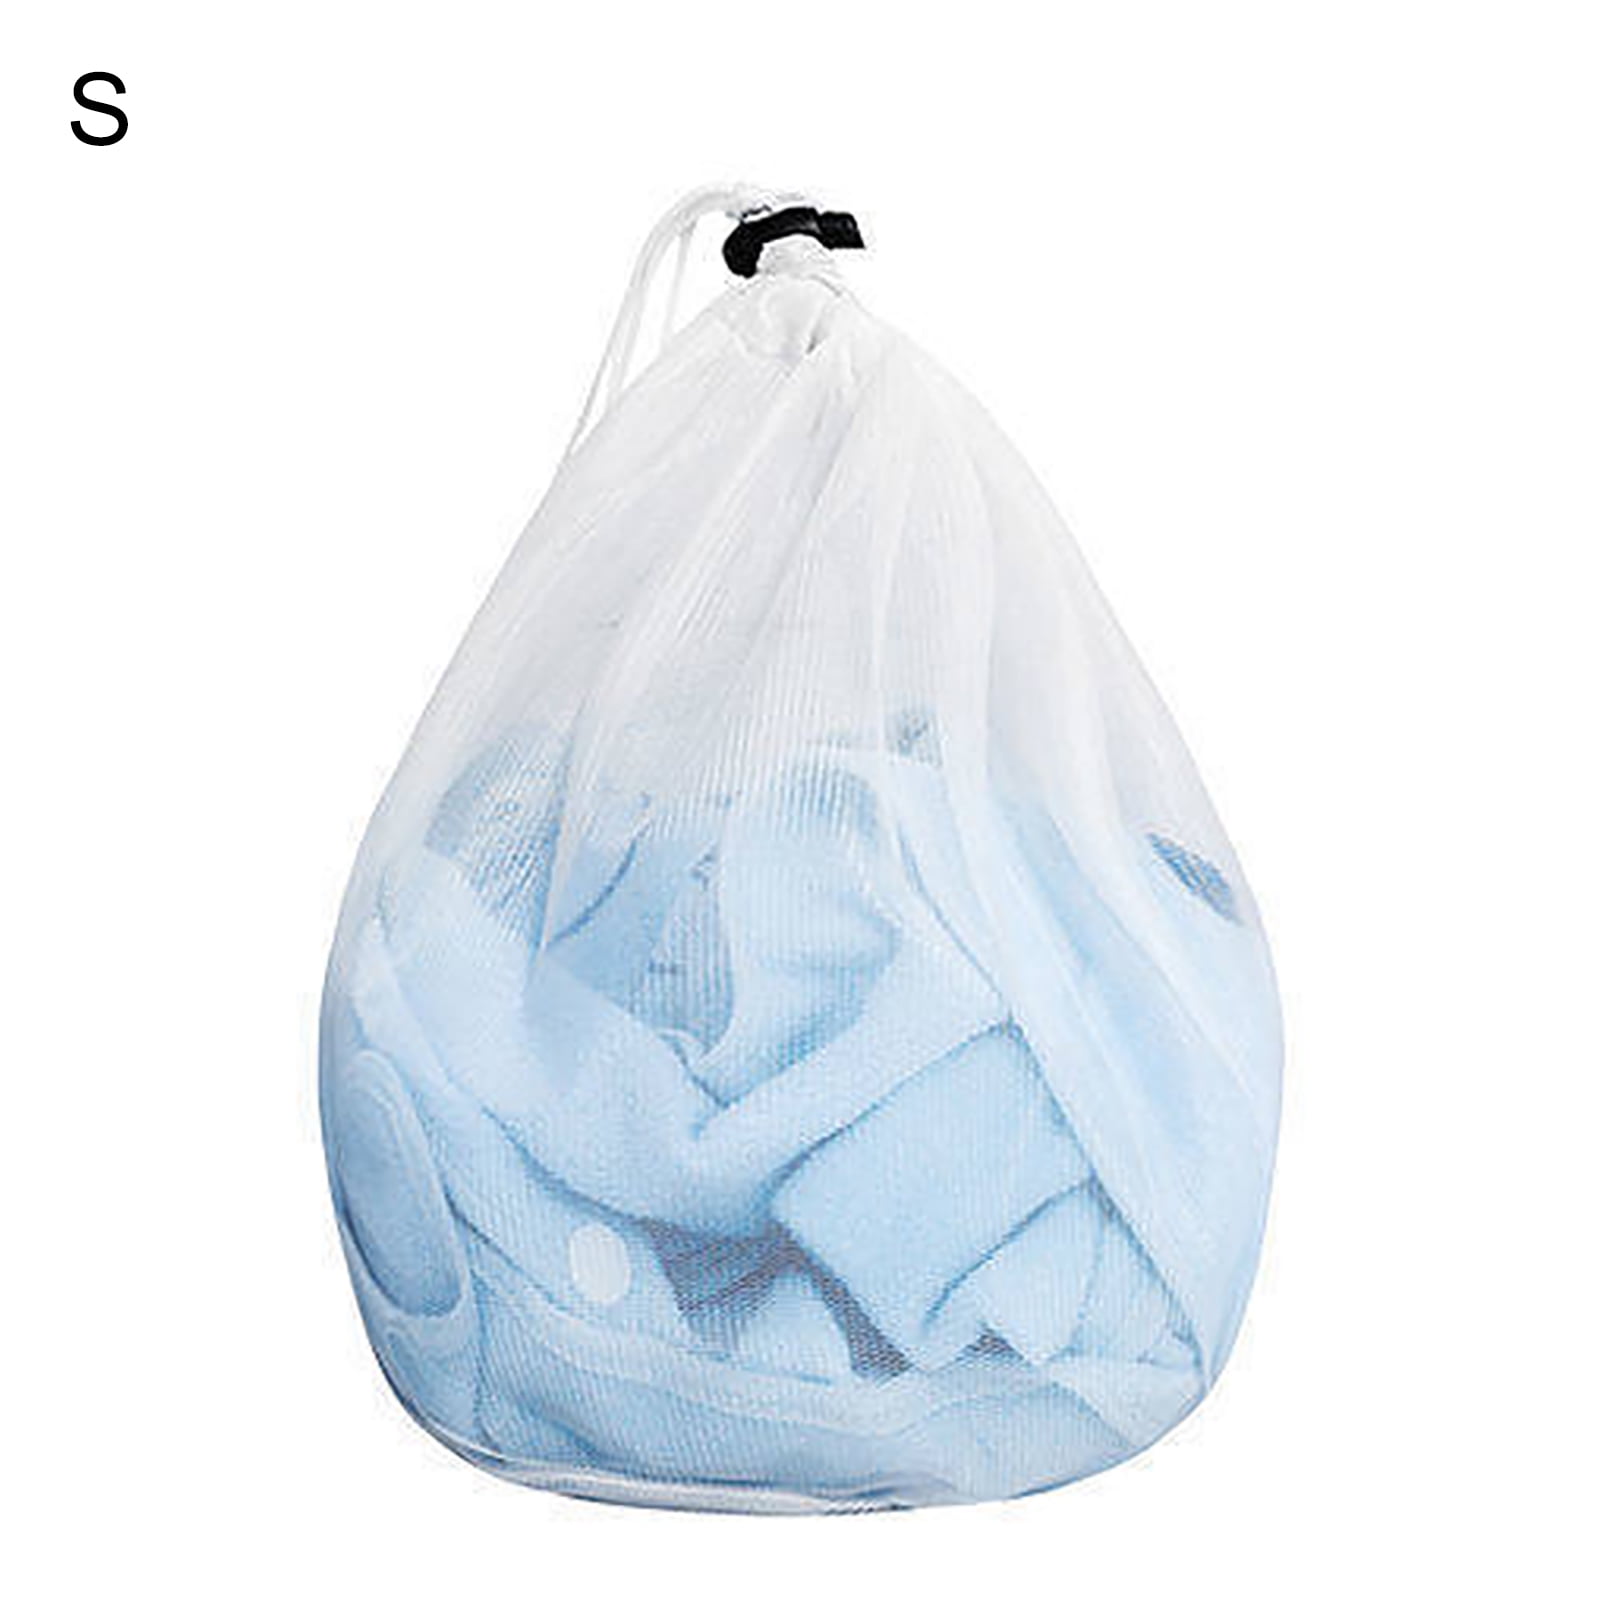 Mesh Laundry Bag with Drawstring,19.6×27.5 inch Large Laundry Bags white A 